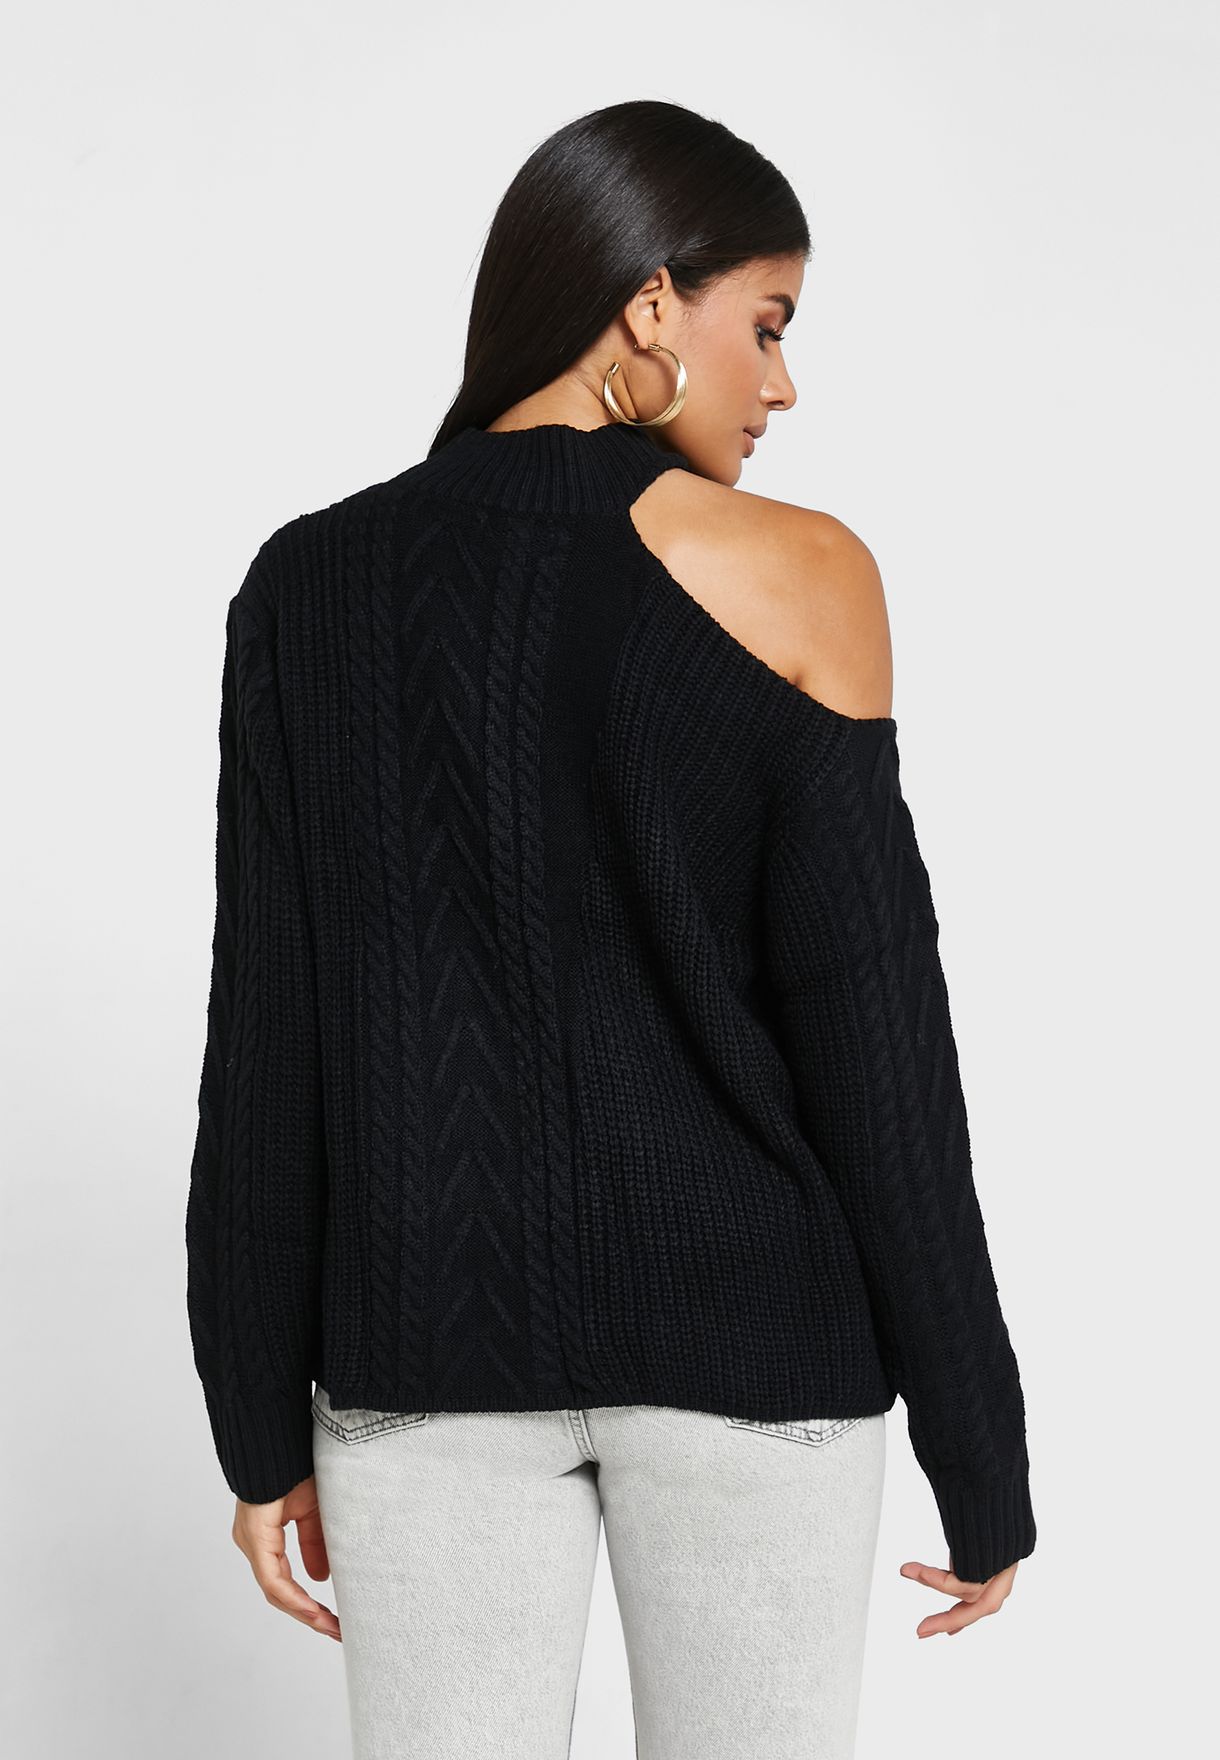 Sweater With One Shoulder Cut Out